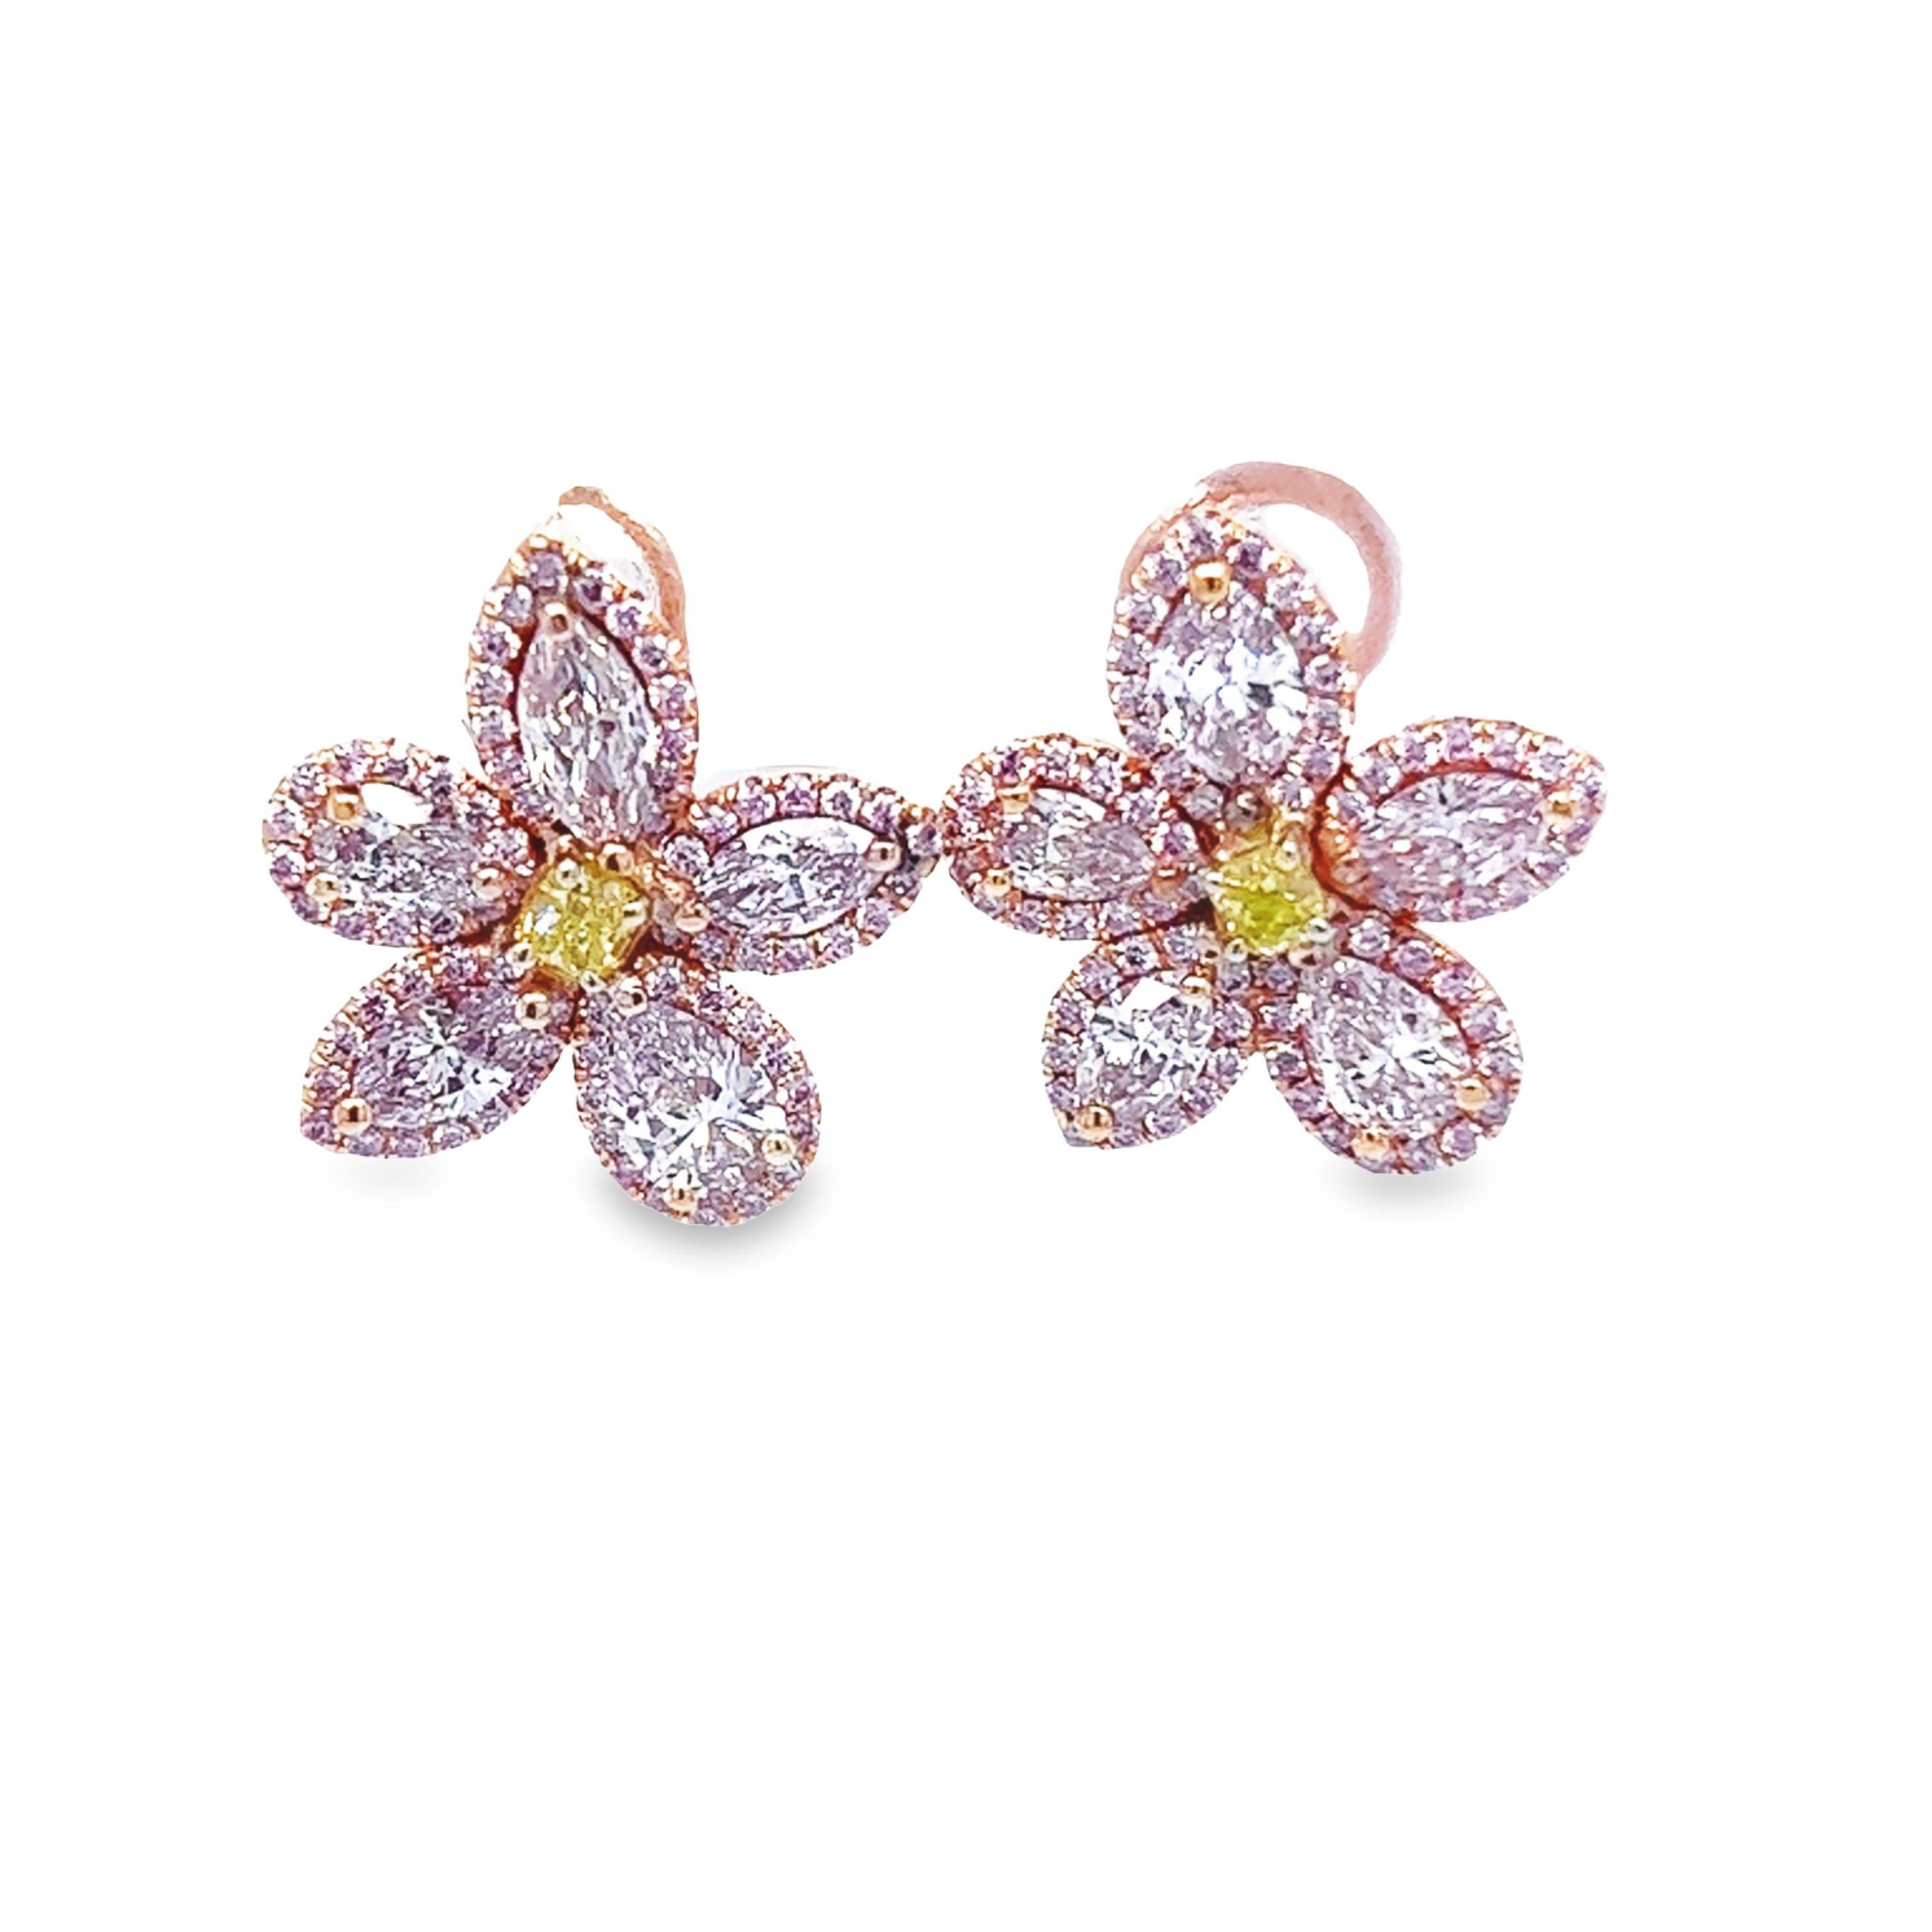 A gorgeous matched pair of flower diamond earrings with 2.35 total carat weight Pear &  Marquise shape Fancy Light Purplish Pink to Light Pink and .28tw Fancy Intense Green Yellow Radiant all GIA Certified. These gorgeous light weight earrings are